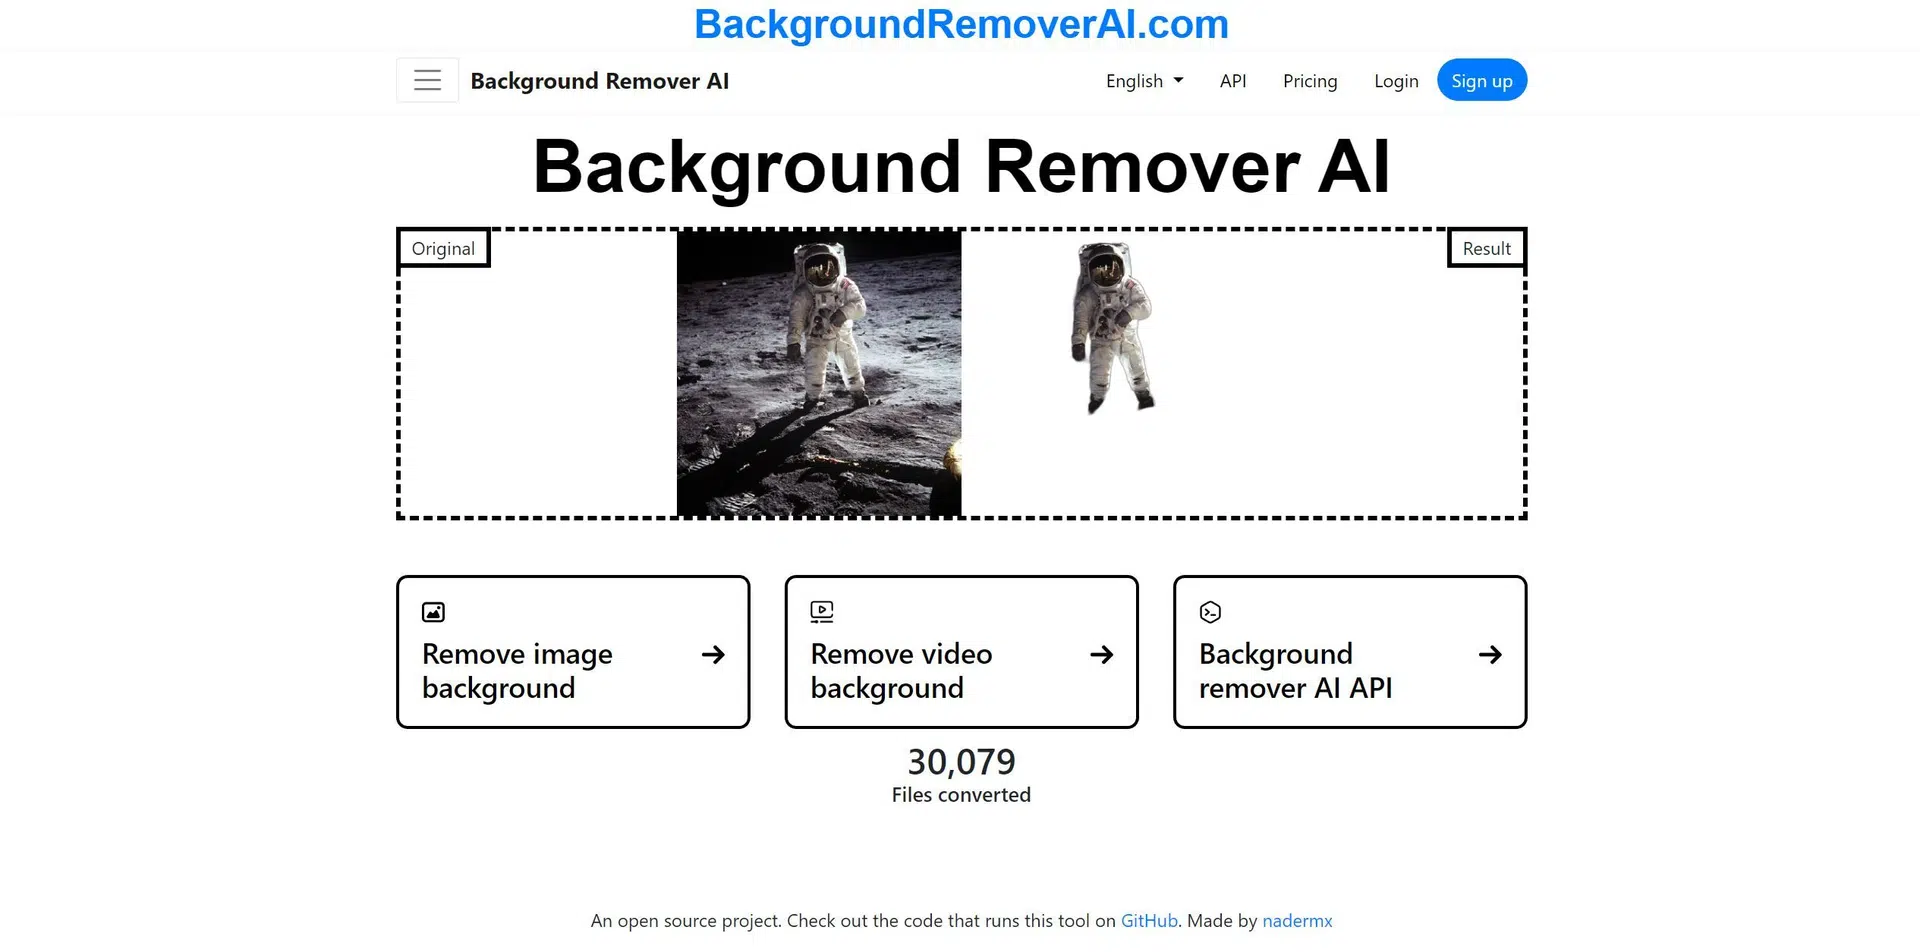 Background Remover AIwebsite picture